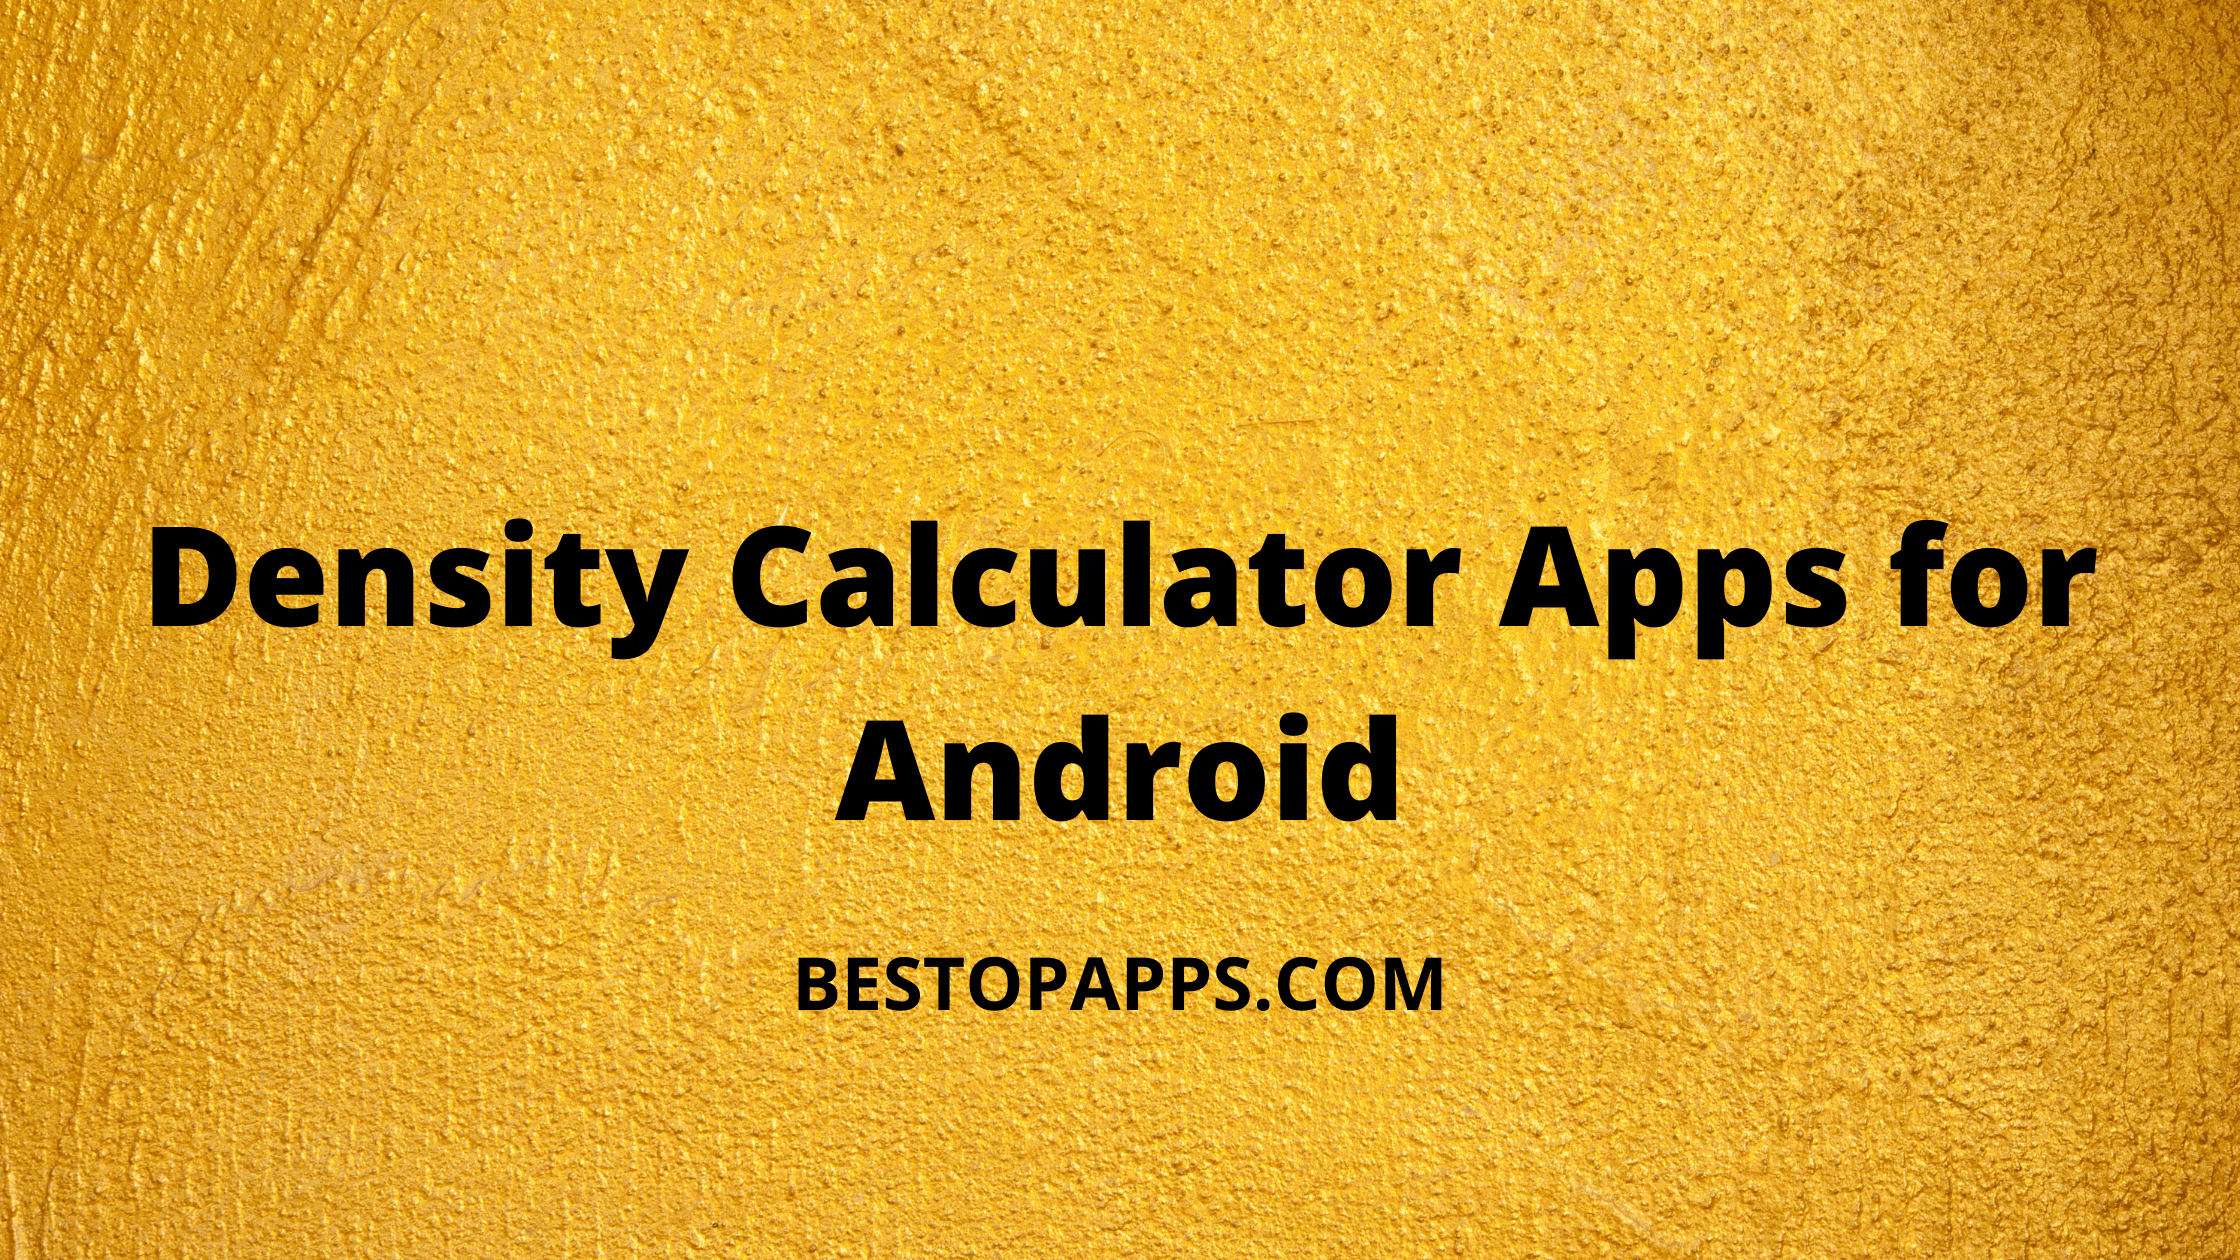 Density Calculator Apps for Android